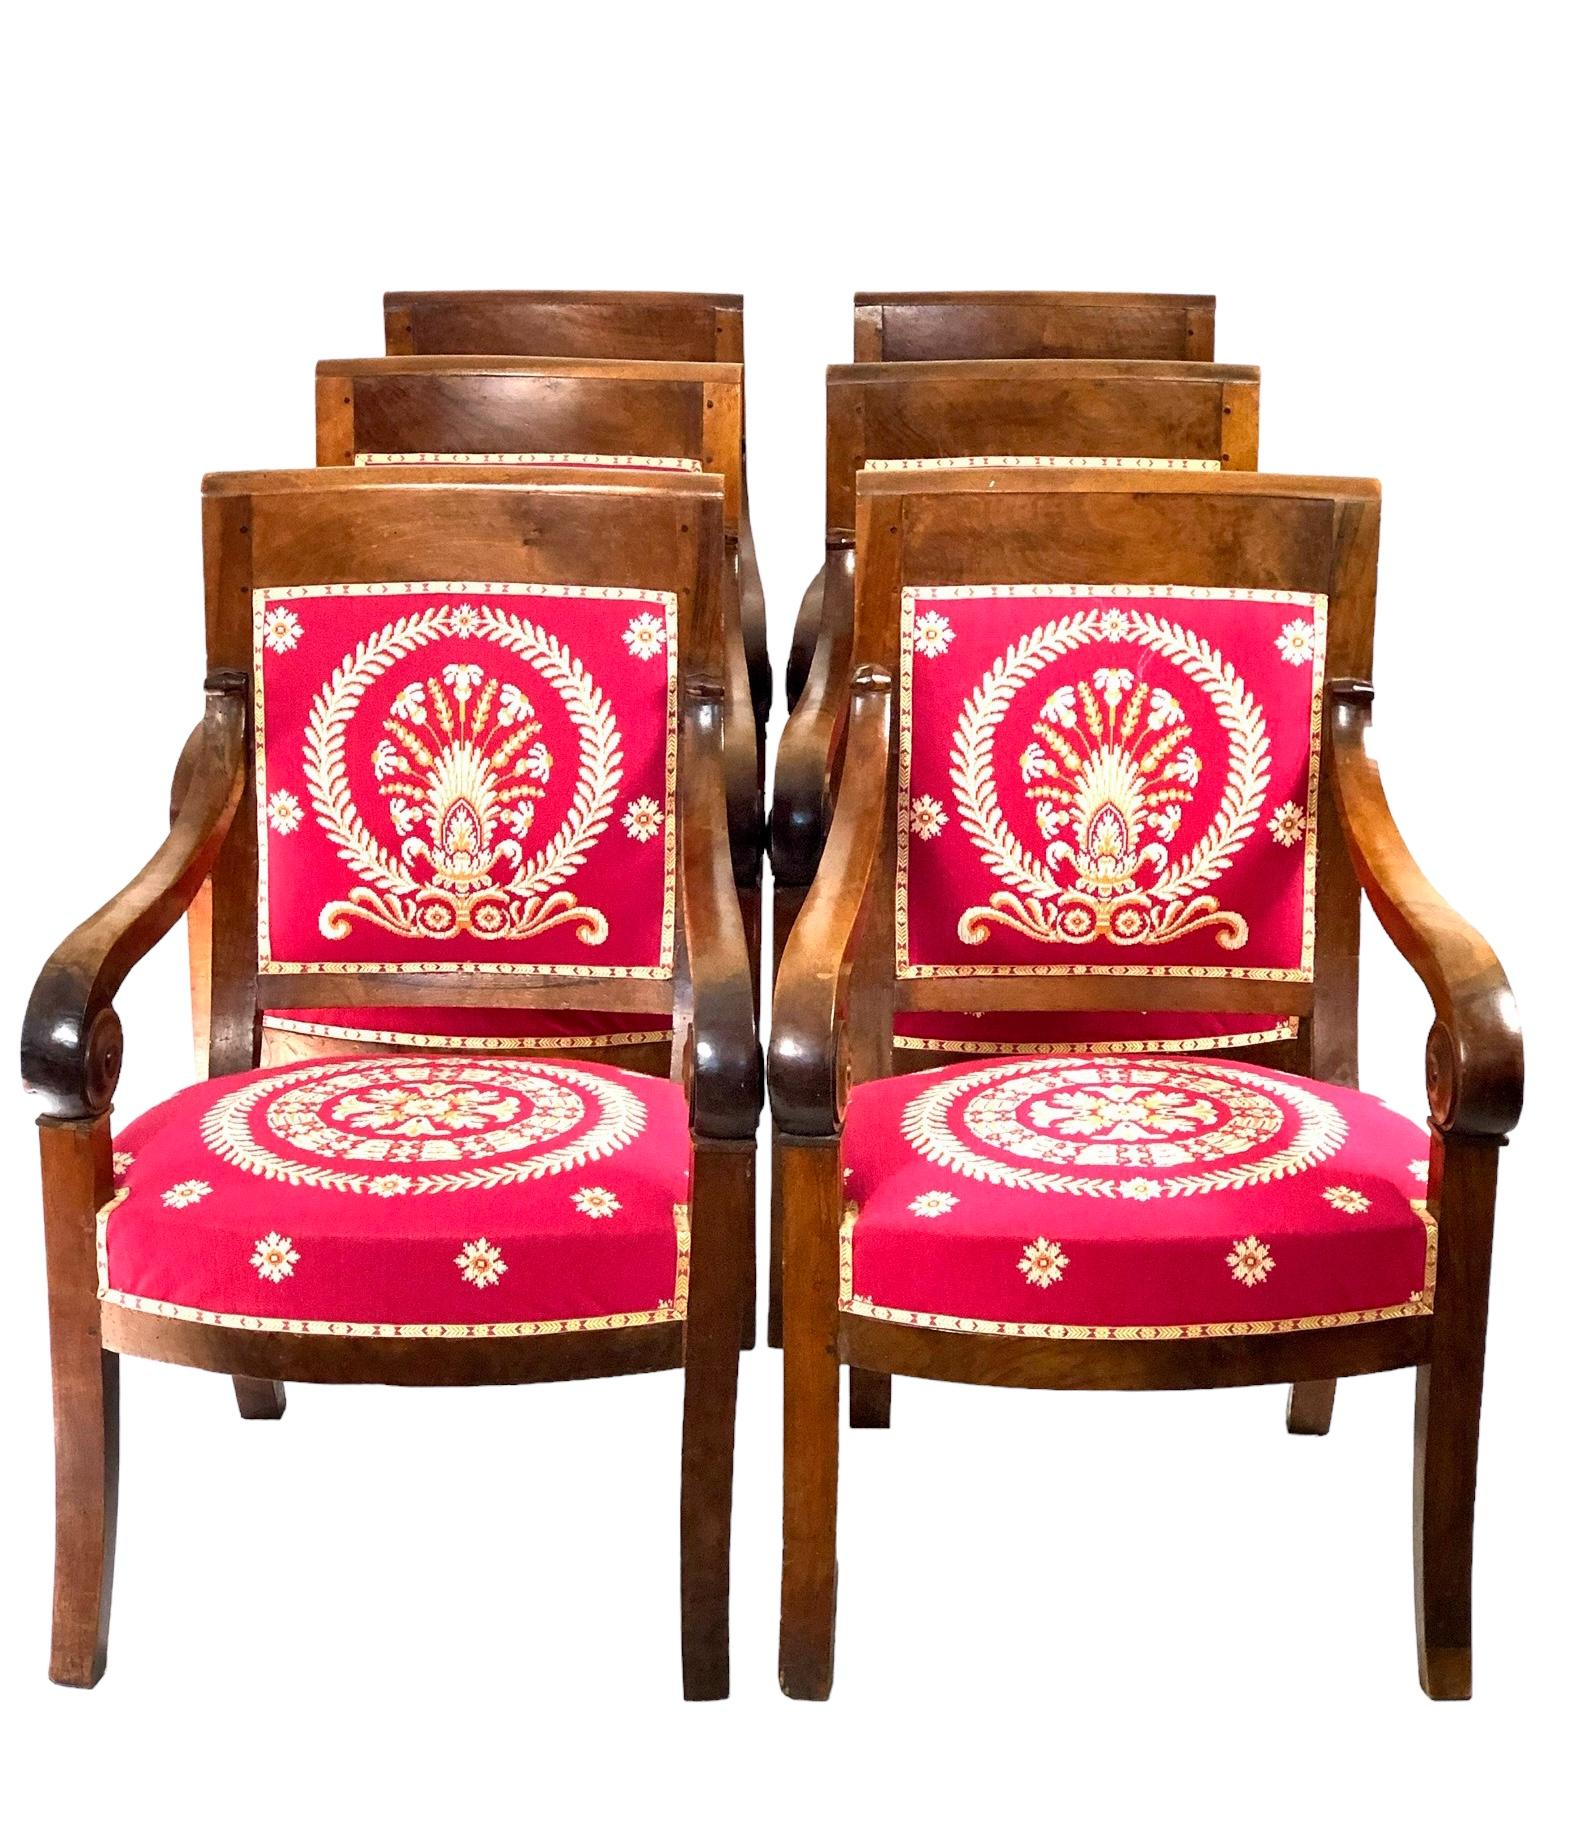 A beautiful set of six striking, crimson-upholstered Fuitwood and Lemon Tree veneer armchairs, named in french Fauteuils à Crosses, dating from the “Restauration” Period in France (1815-1830), during which time rooms and interiors were being